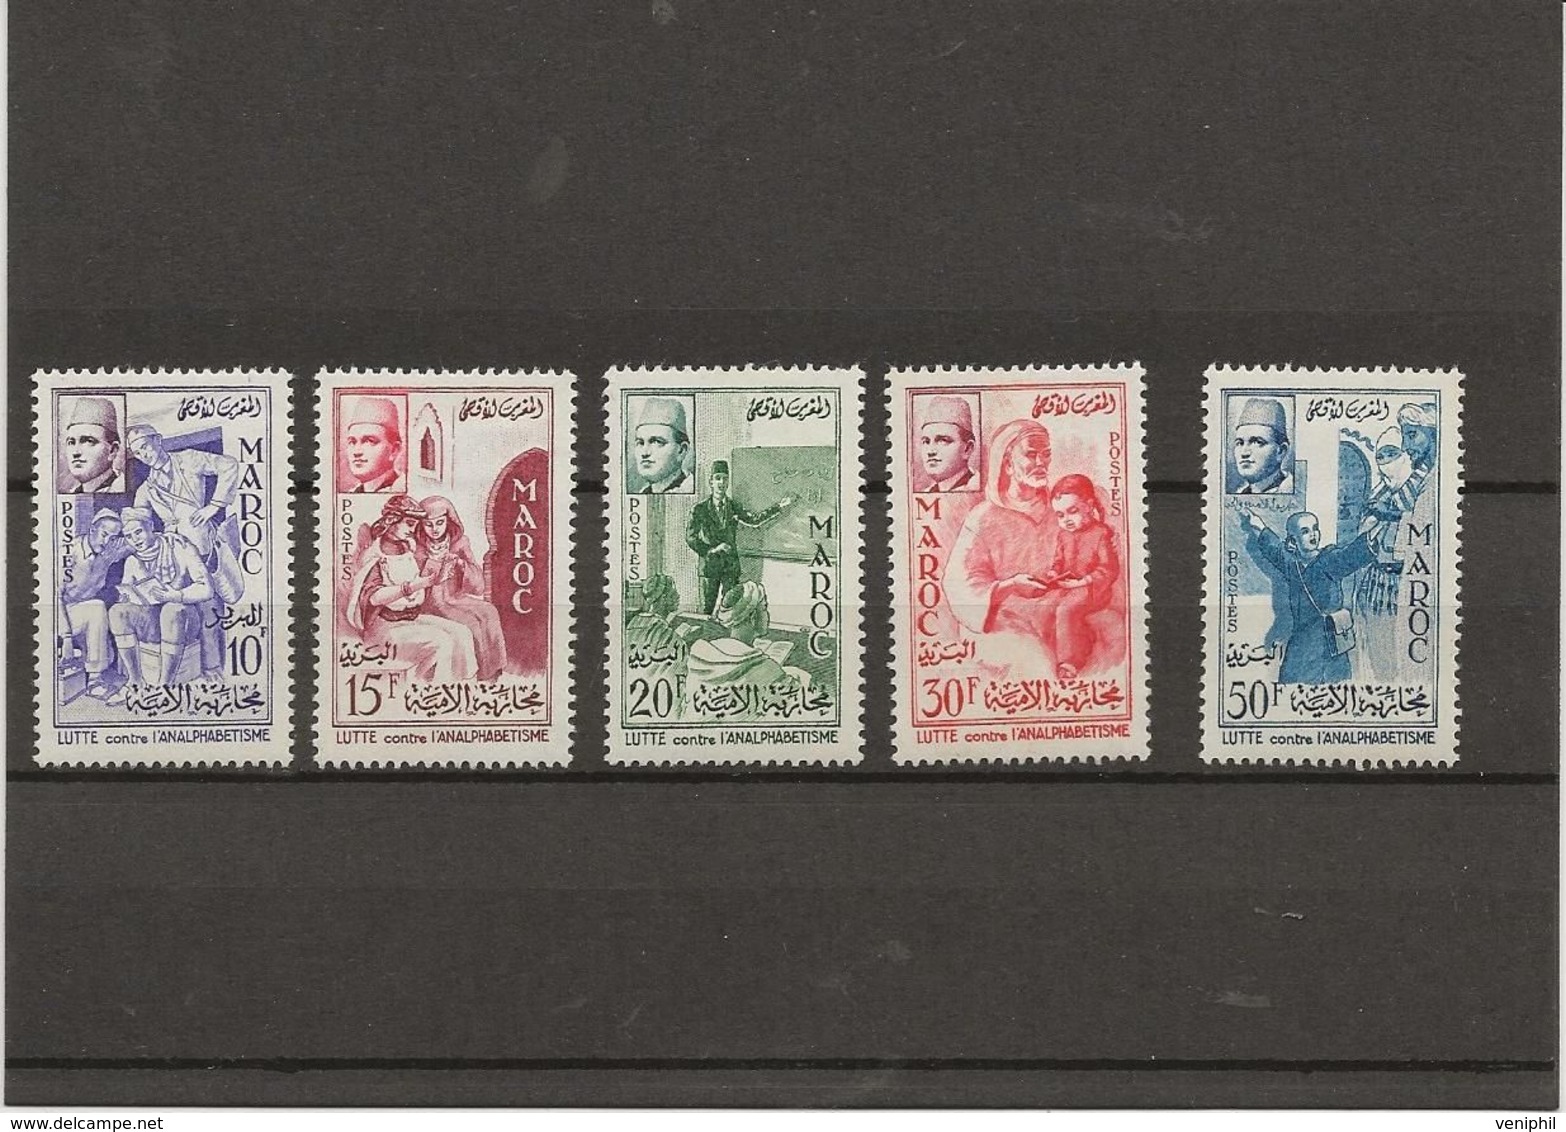 MAROC - TIMBRES N° 369 A 373 NEUF INFIME CHARNIERE -ANNEE 1956 -COTE : 27 € - Unused Stamps